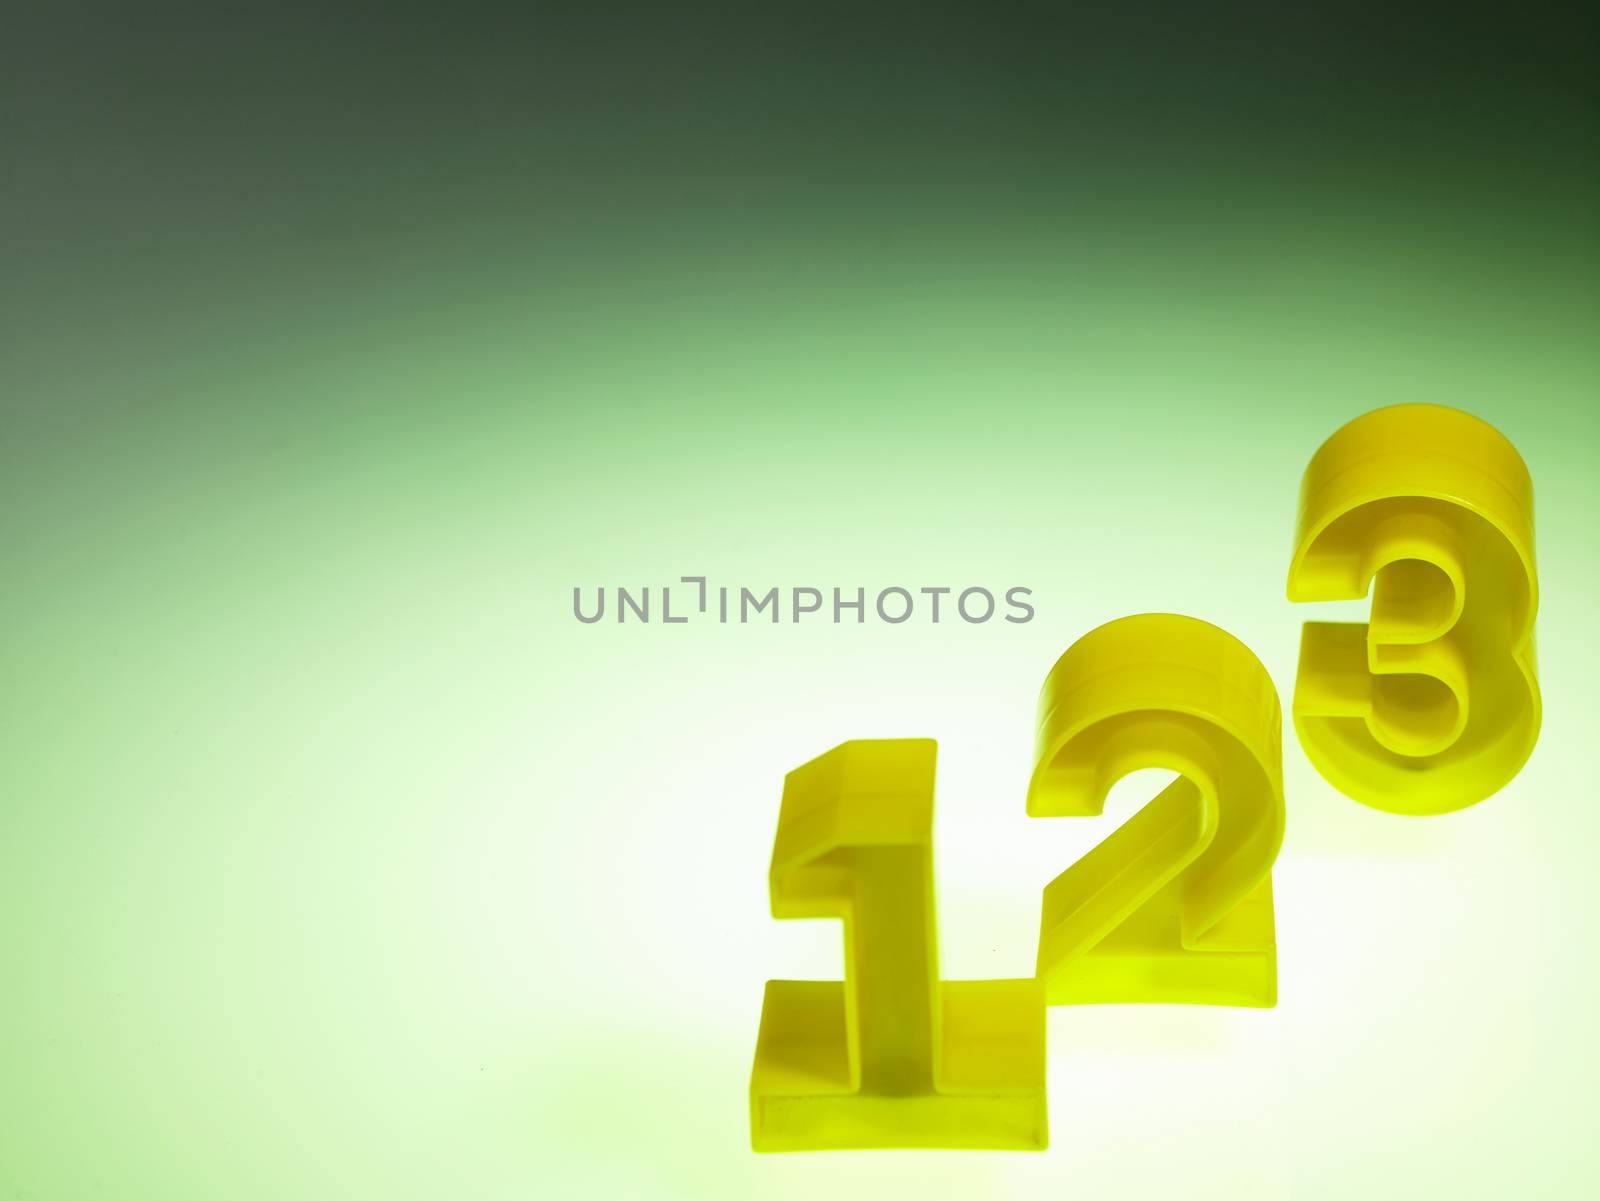 plastic numbers 123 on green background